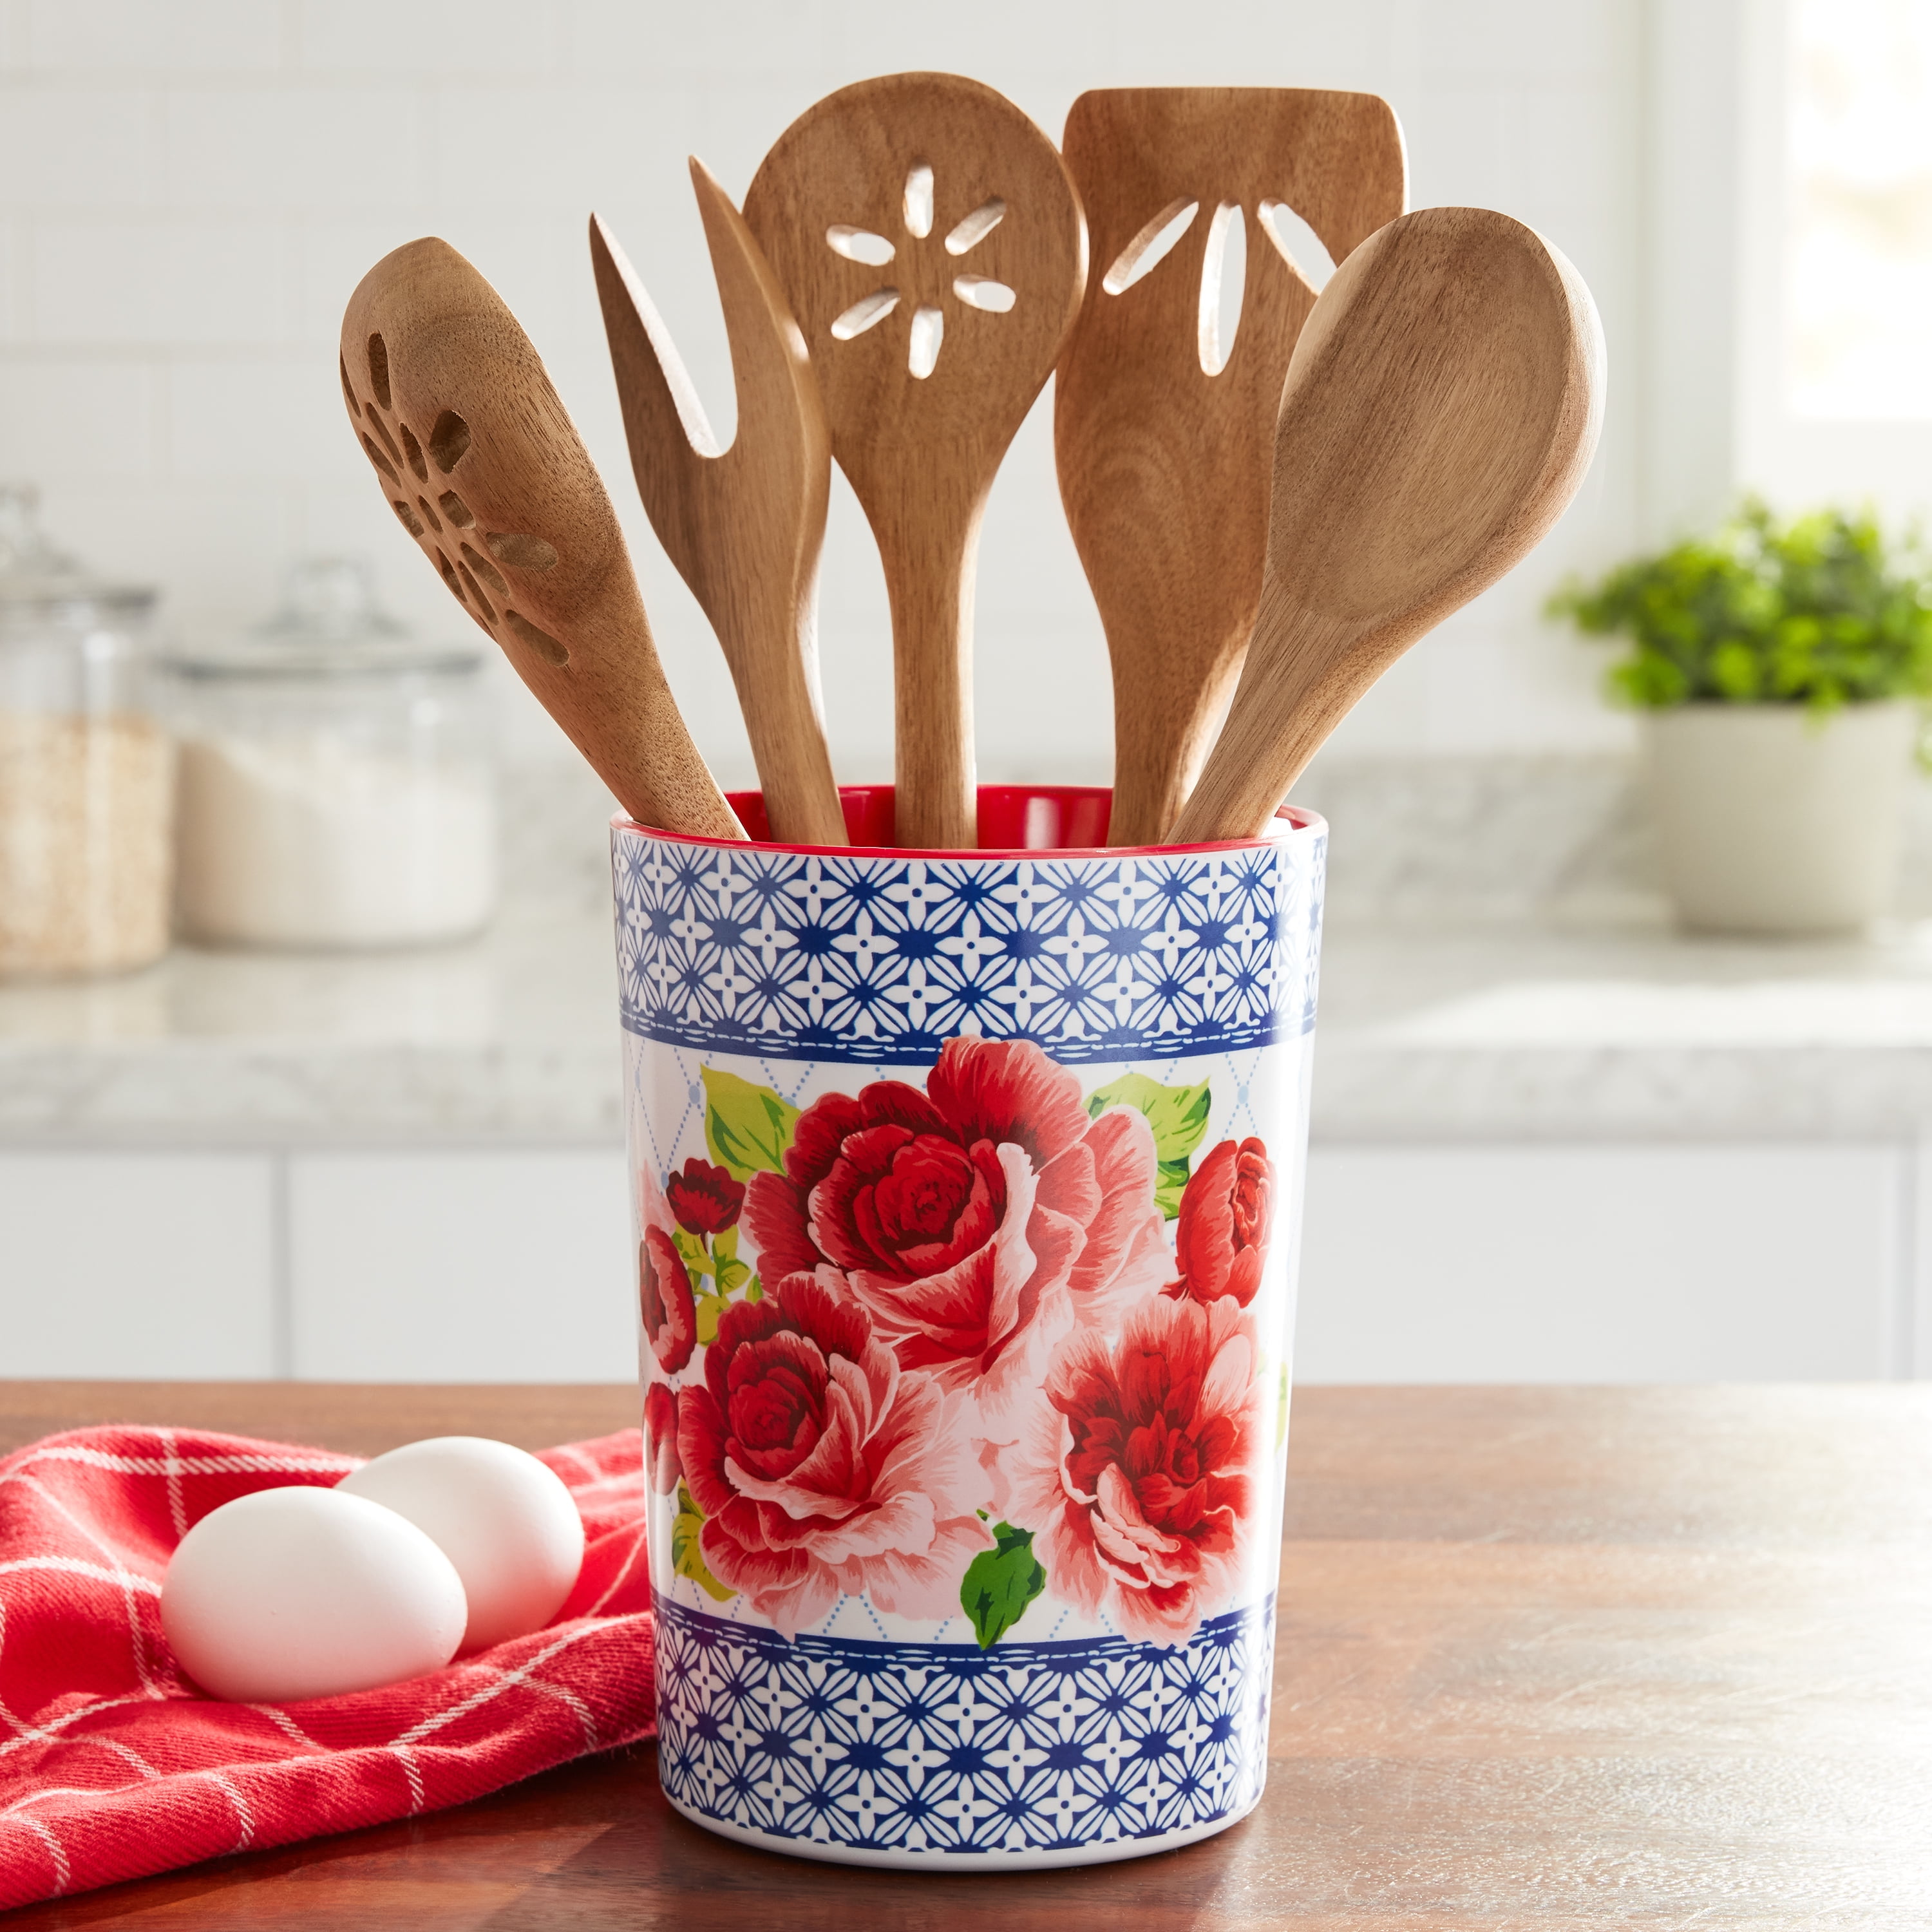 Country Garden Utensil Holder by Pioneer Woman